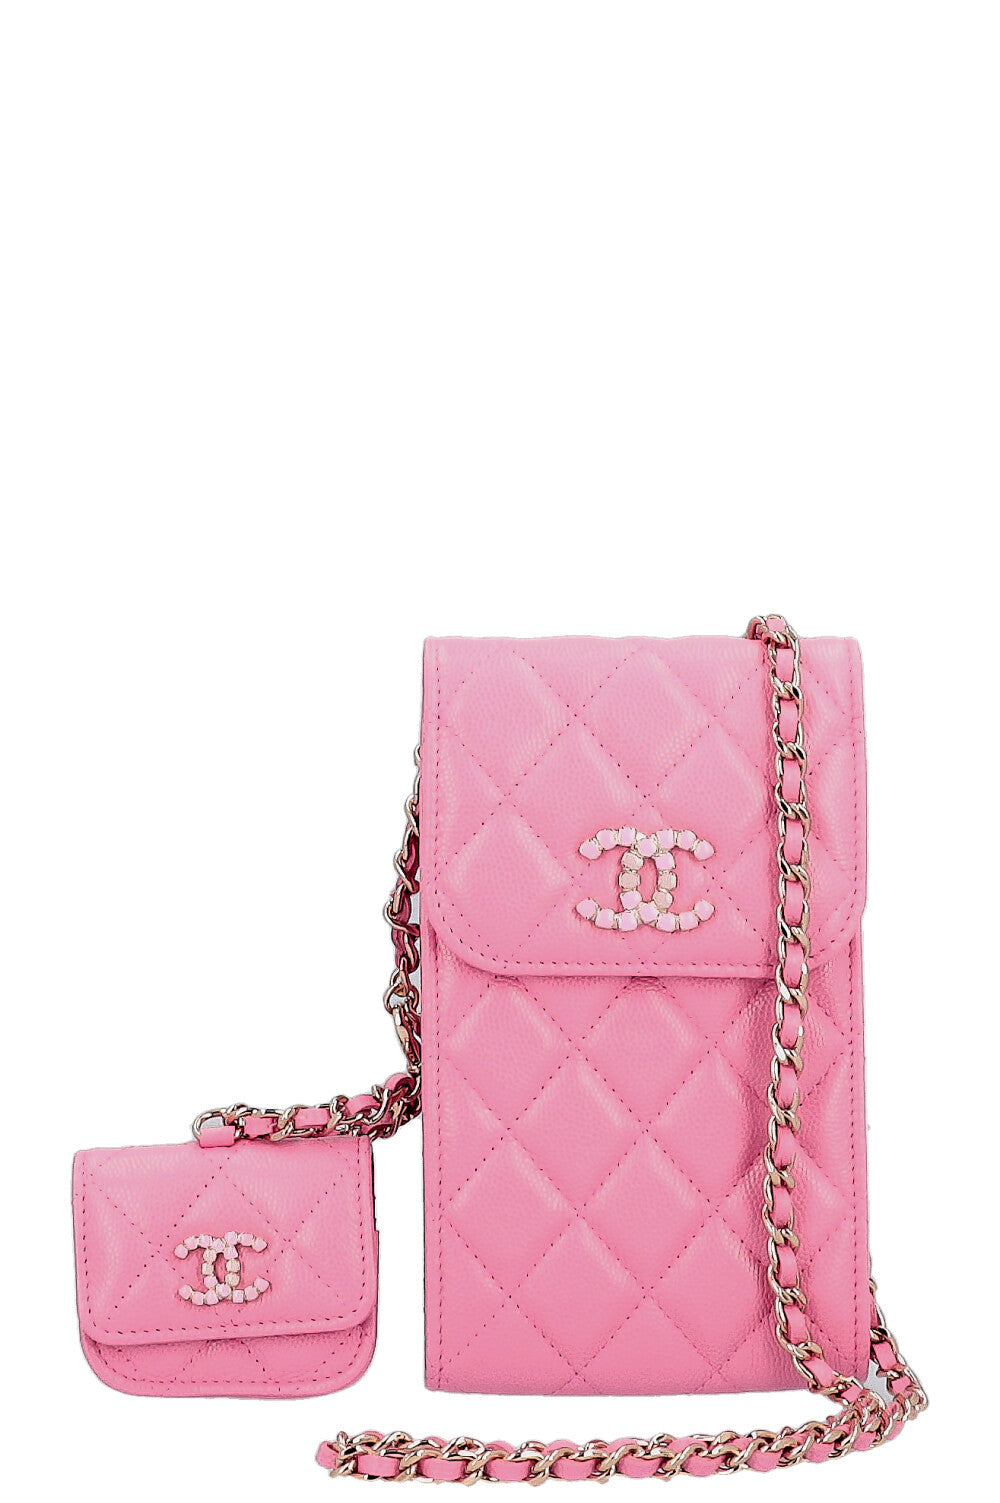 chanel bag iphone case